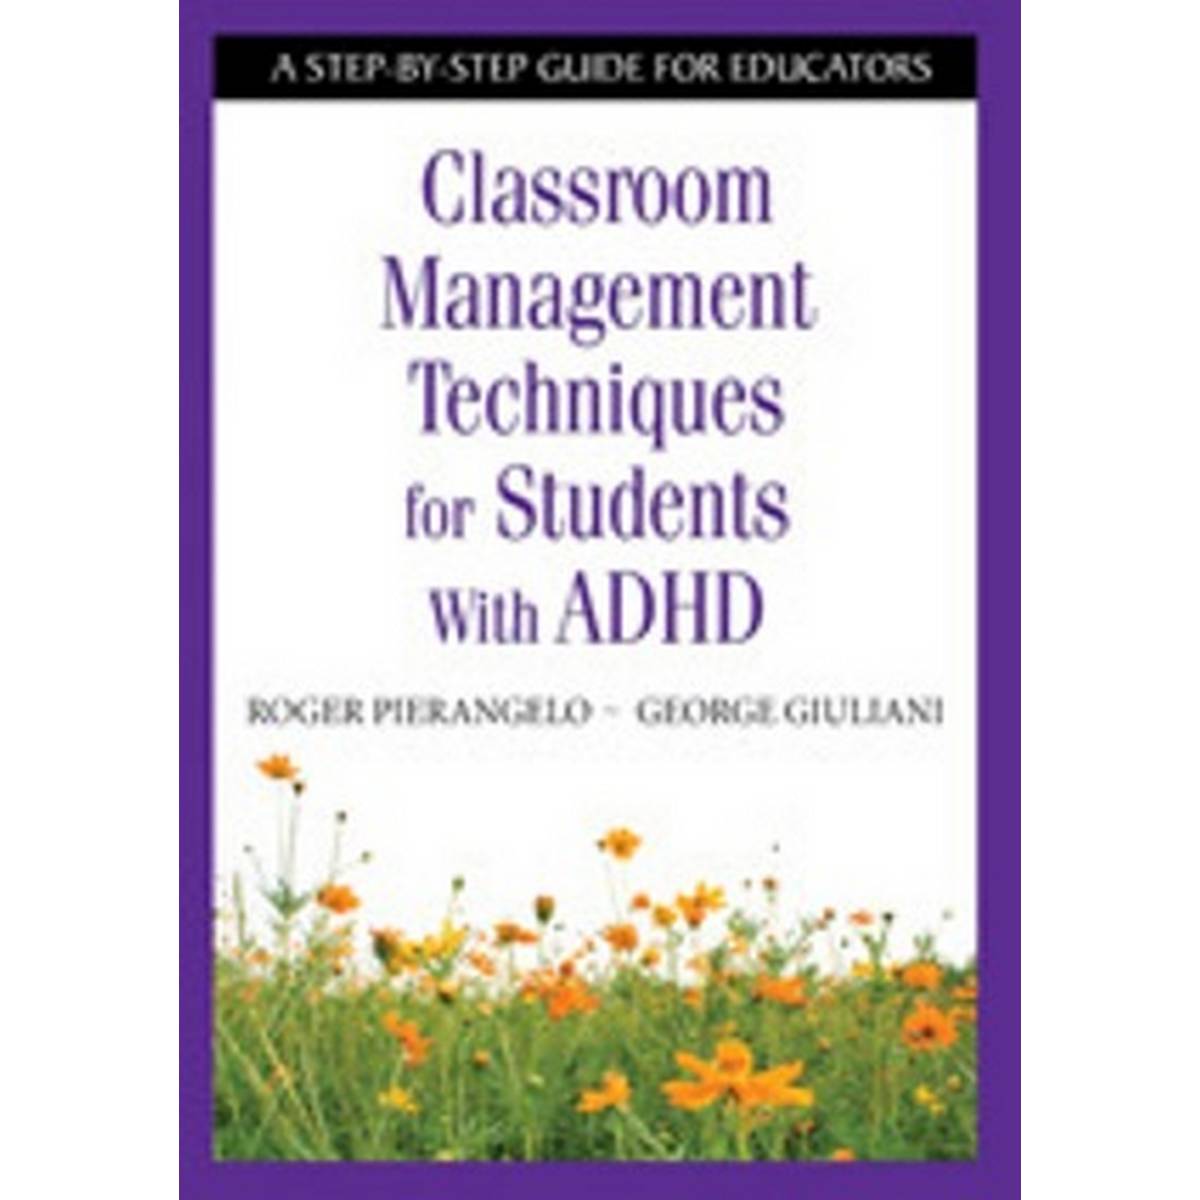 Classroom Management Techniques for Students with ADHD